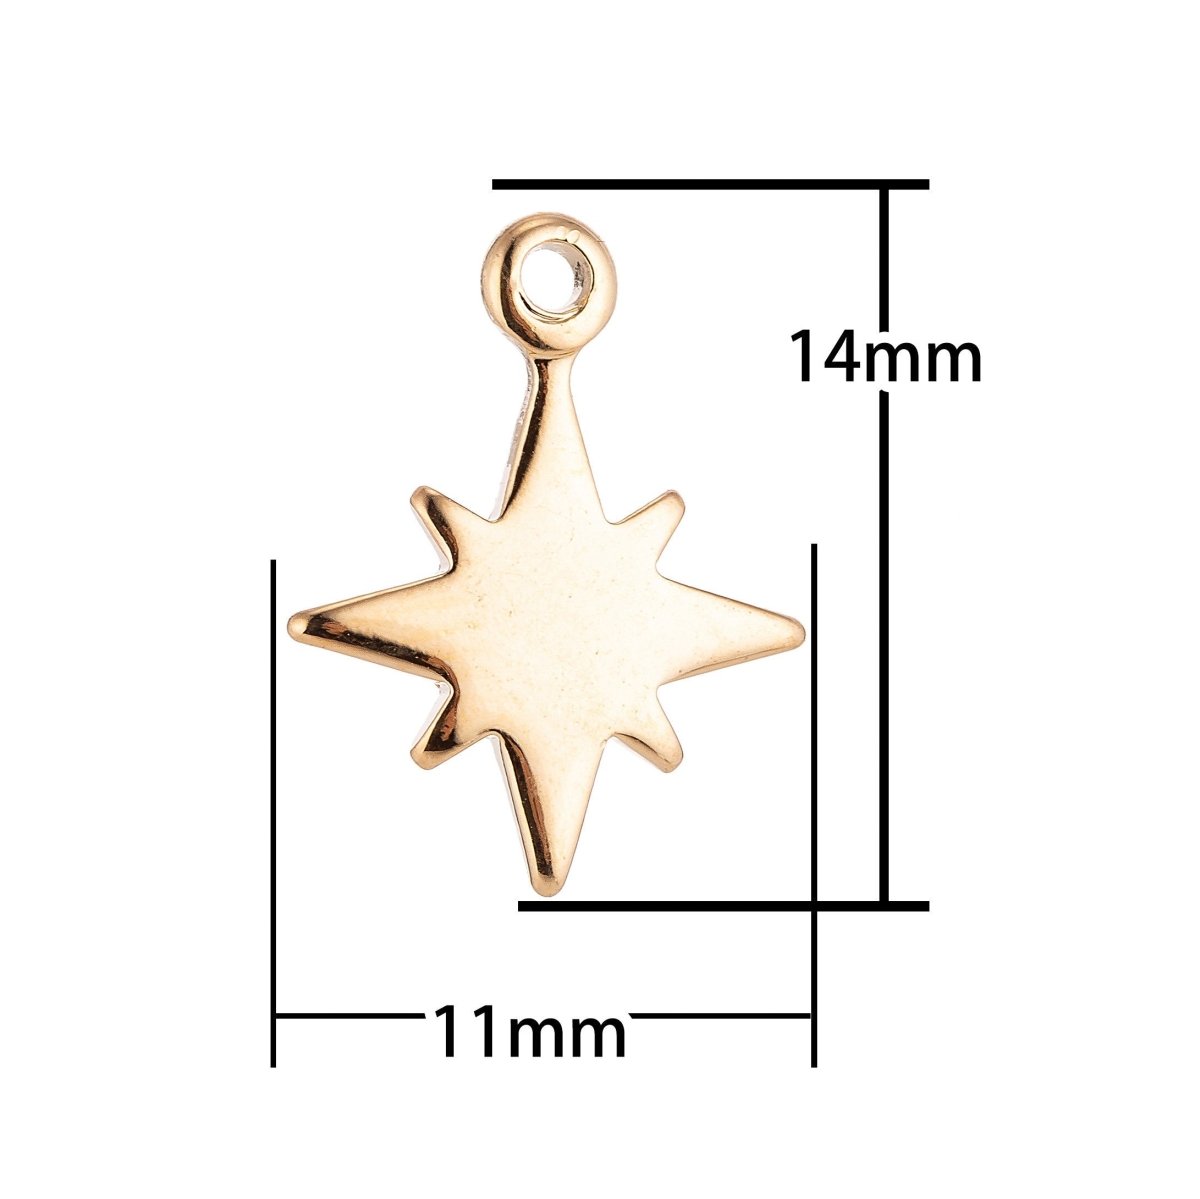 Dainty 18K Gold Fileld Star Burst North Star Sky, Wish Layer Necklace Pendant Charm Bead Earring Finding for Jewelry Making C-126 - DLUXCA